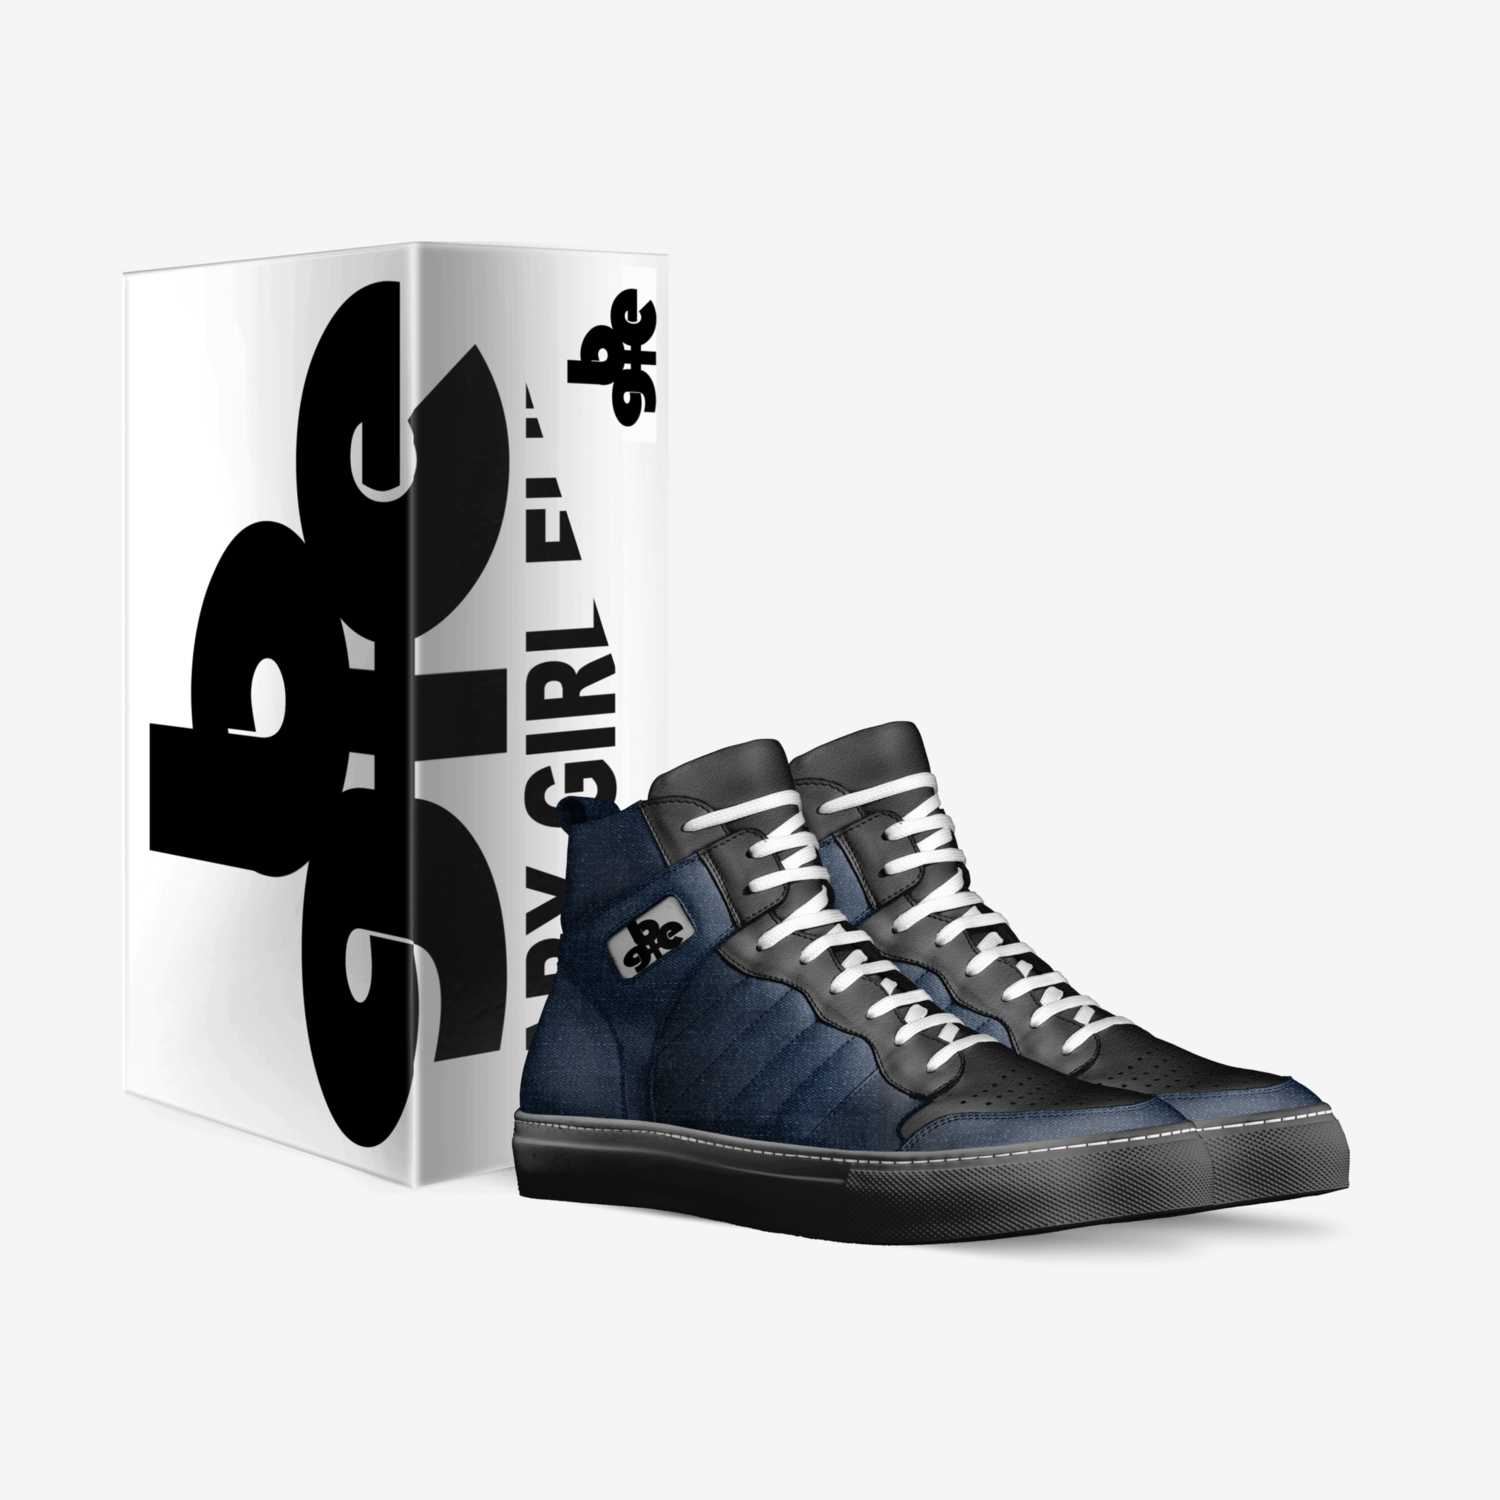 Denim X SJ1 custom made in Italy shoes by Baby-girl Elite | Box view